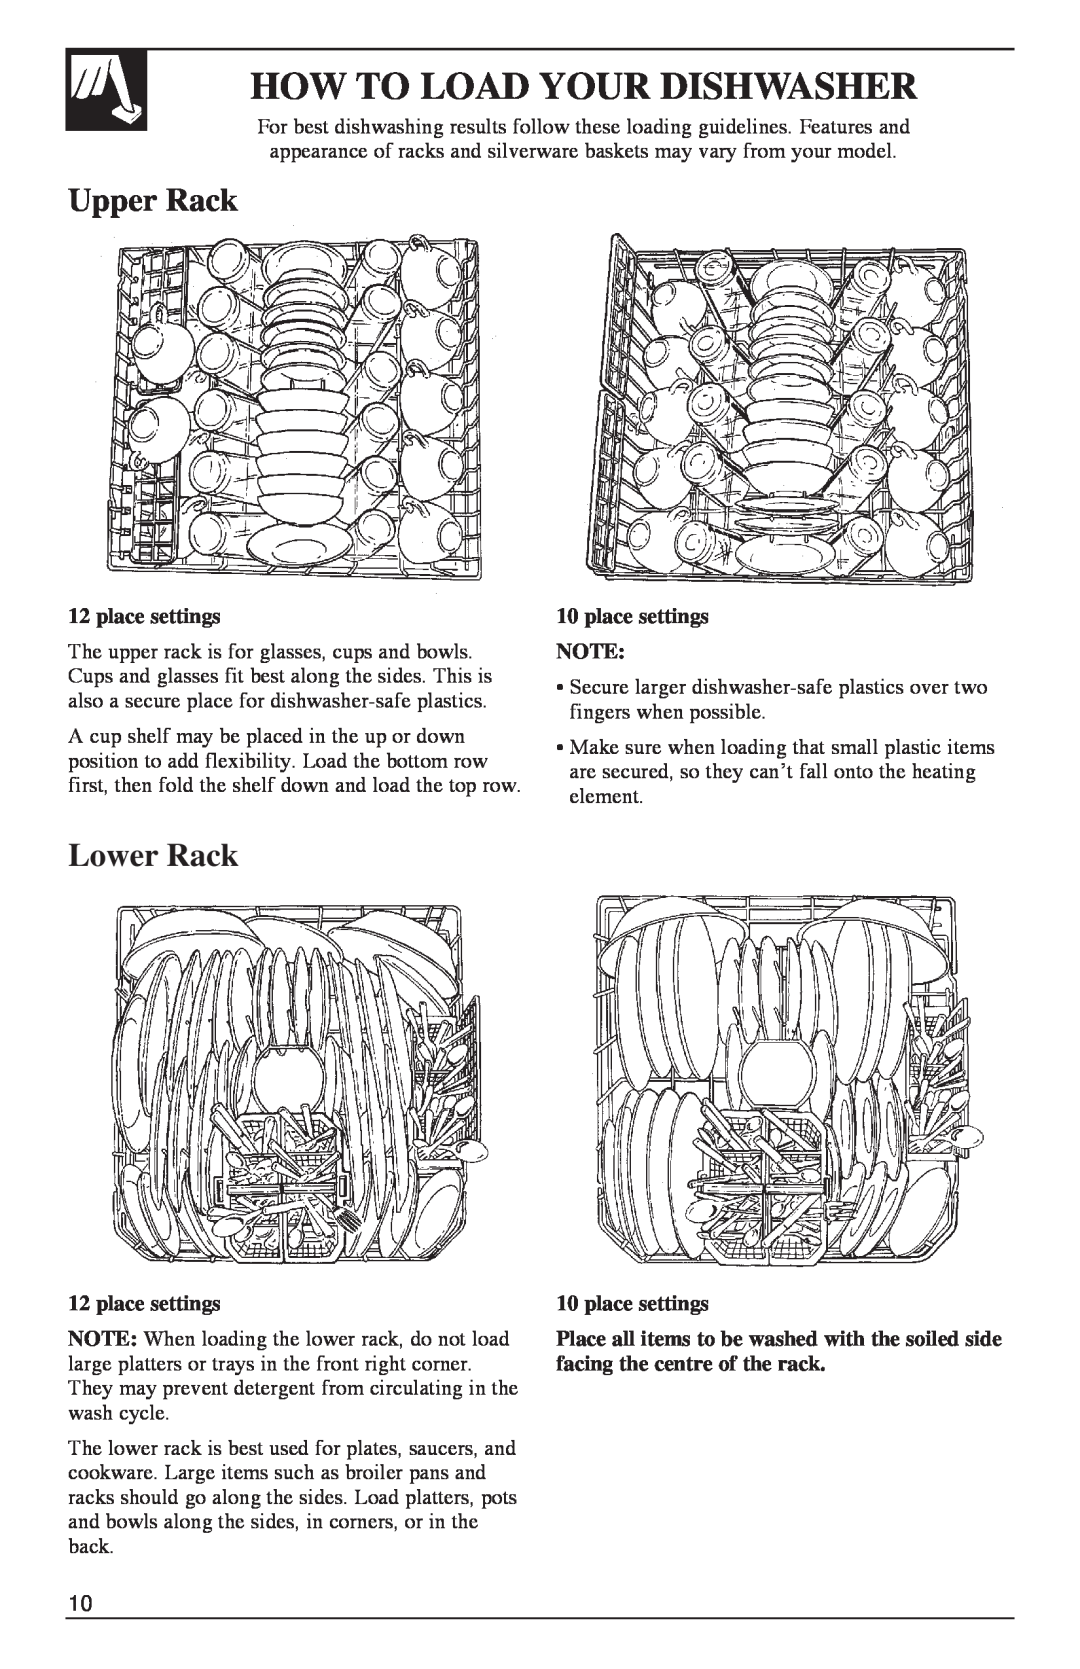 GE 500A200P047 installation instructions How To Load Your Dishwasher, Upper Rack, Lower Rack, place settings 